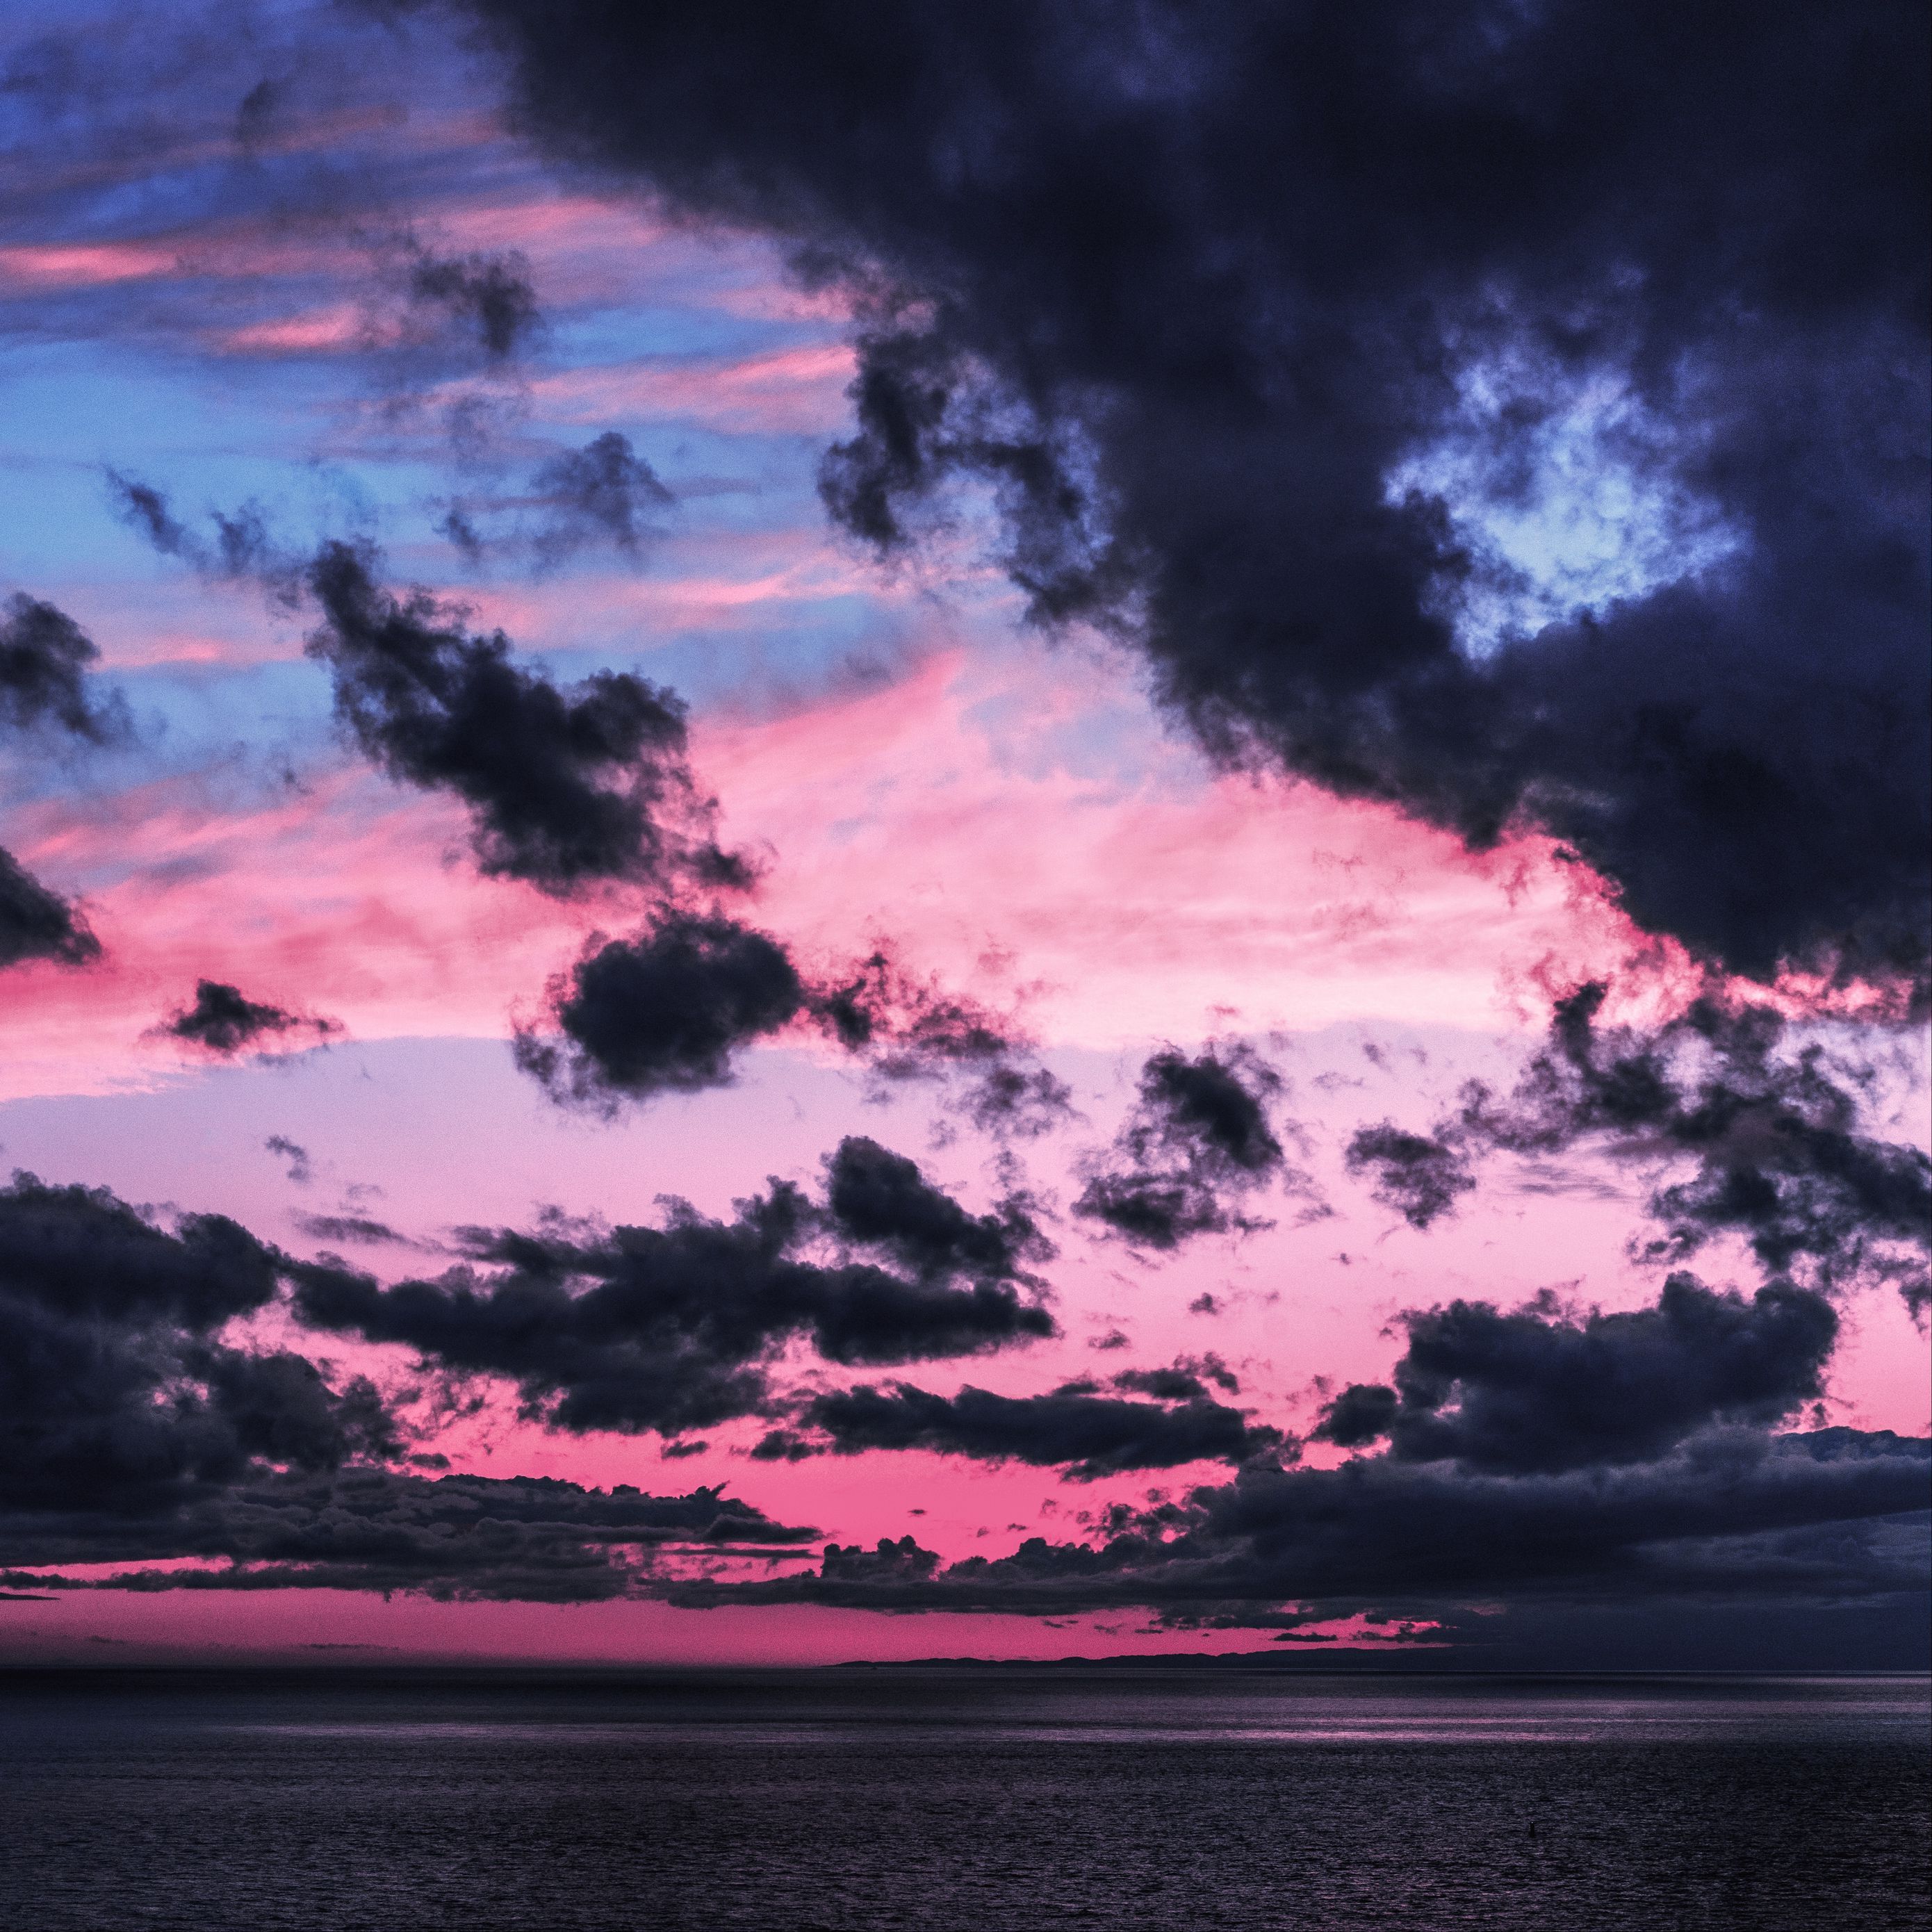 A dramatic pink and blue sunset over the sea, with dark clouds gathering. - Twilight